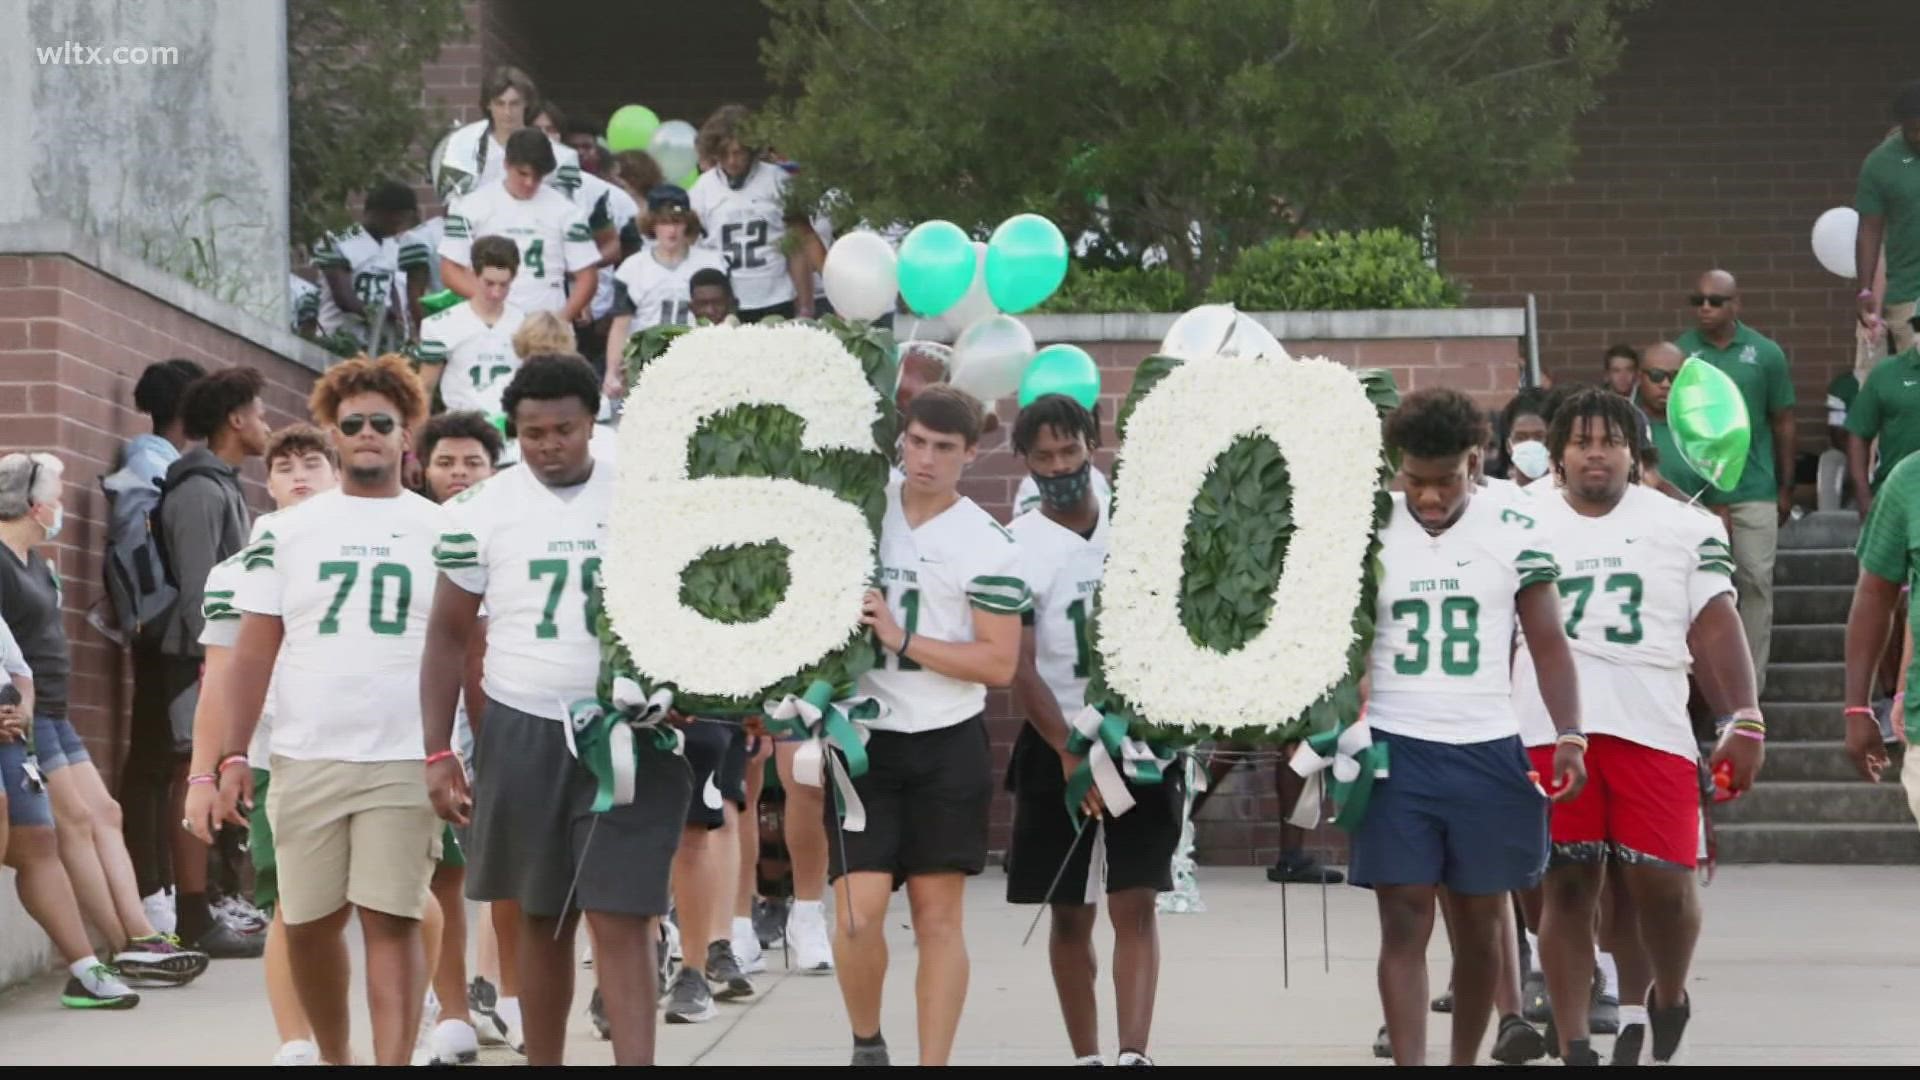 Dutch Fork High School held a memorial service Friday for football player Jack Alkhatib, who died suddenly after collapsing at practice on Tuesday.